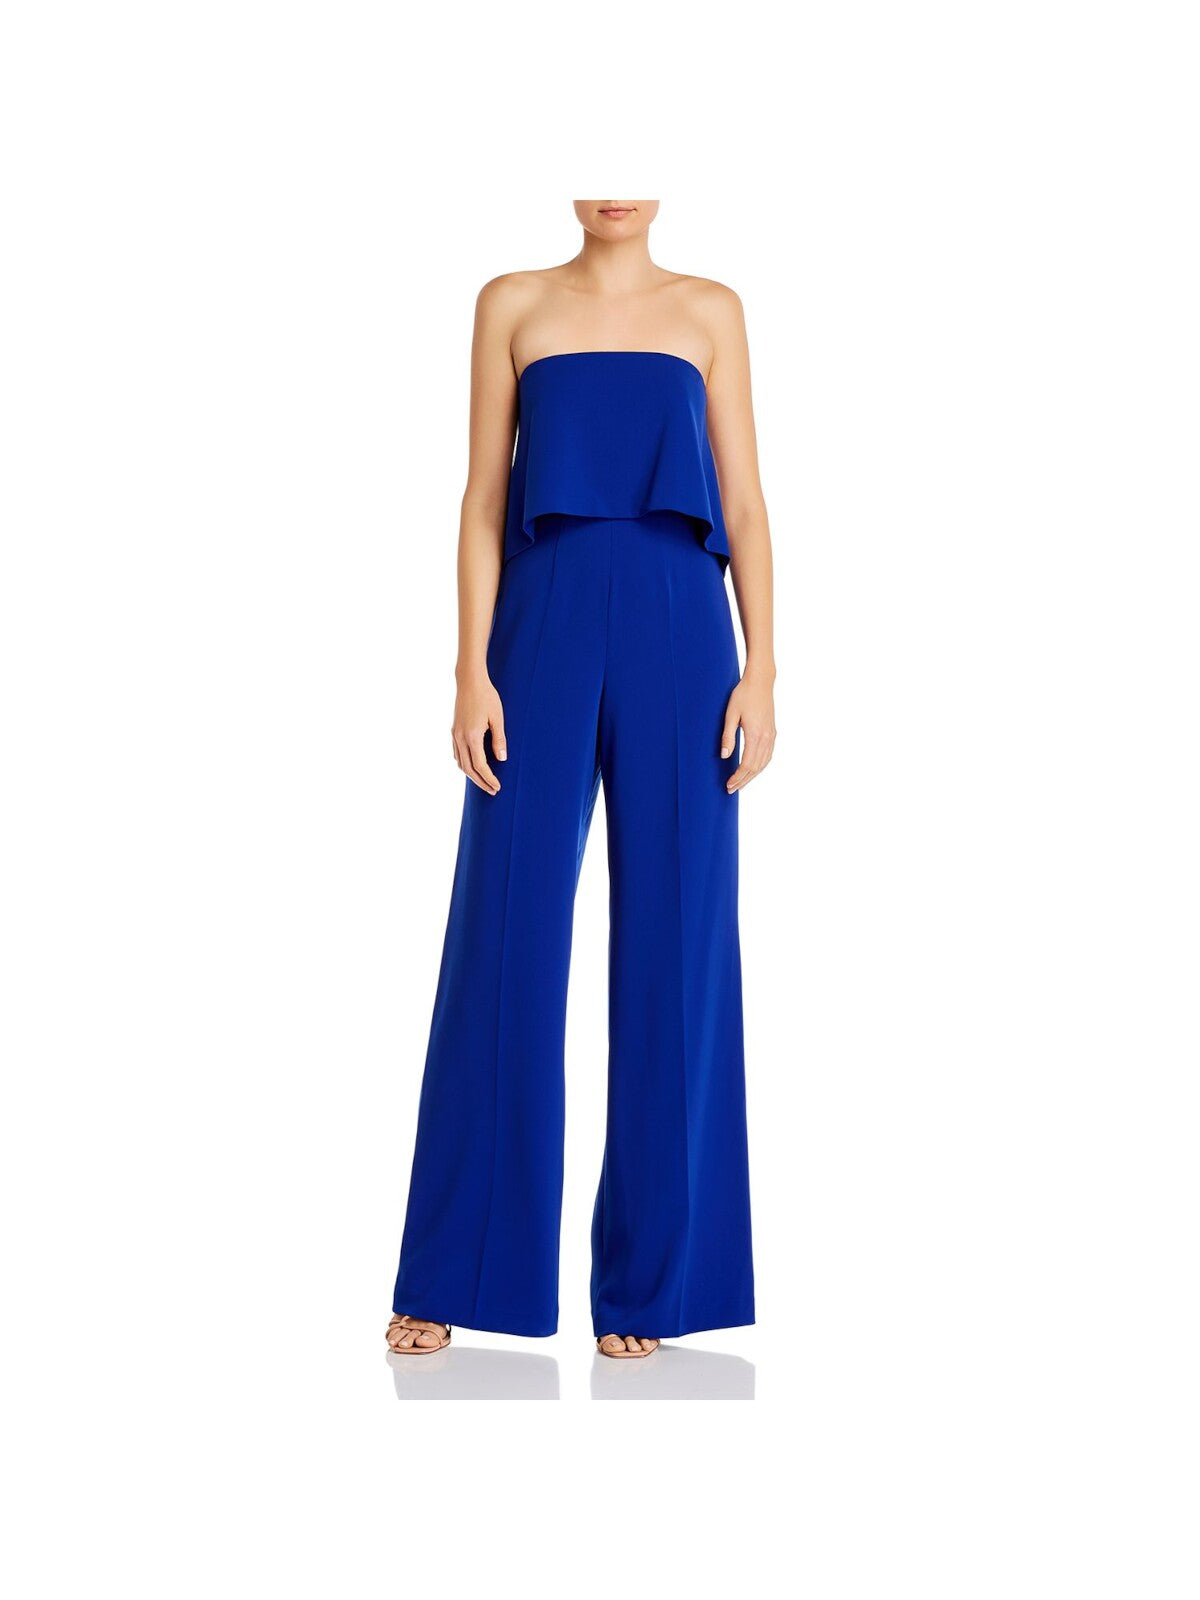 JAY GODFREY Womens Blue Stretch Zippered Cut Out Popover Strapless Evening Wide Leg Jumpsuit 14